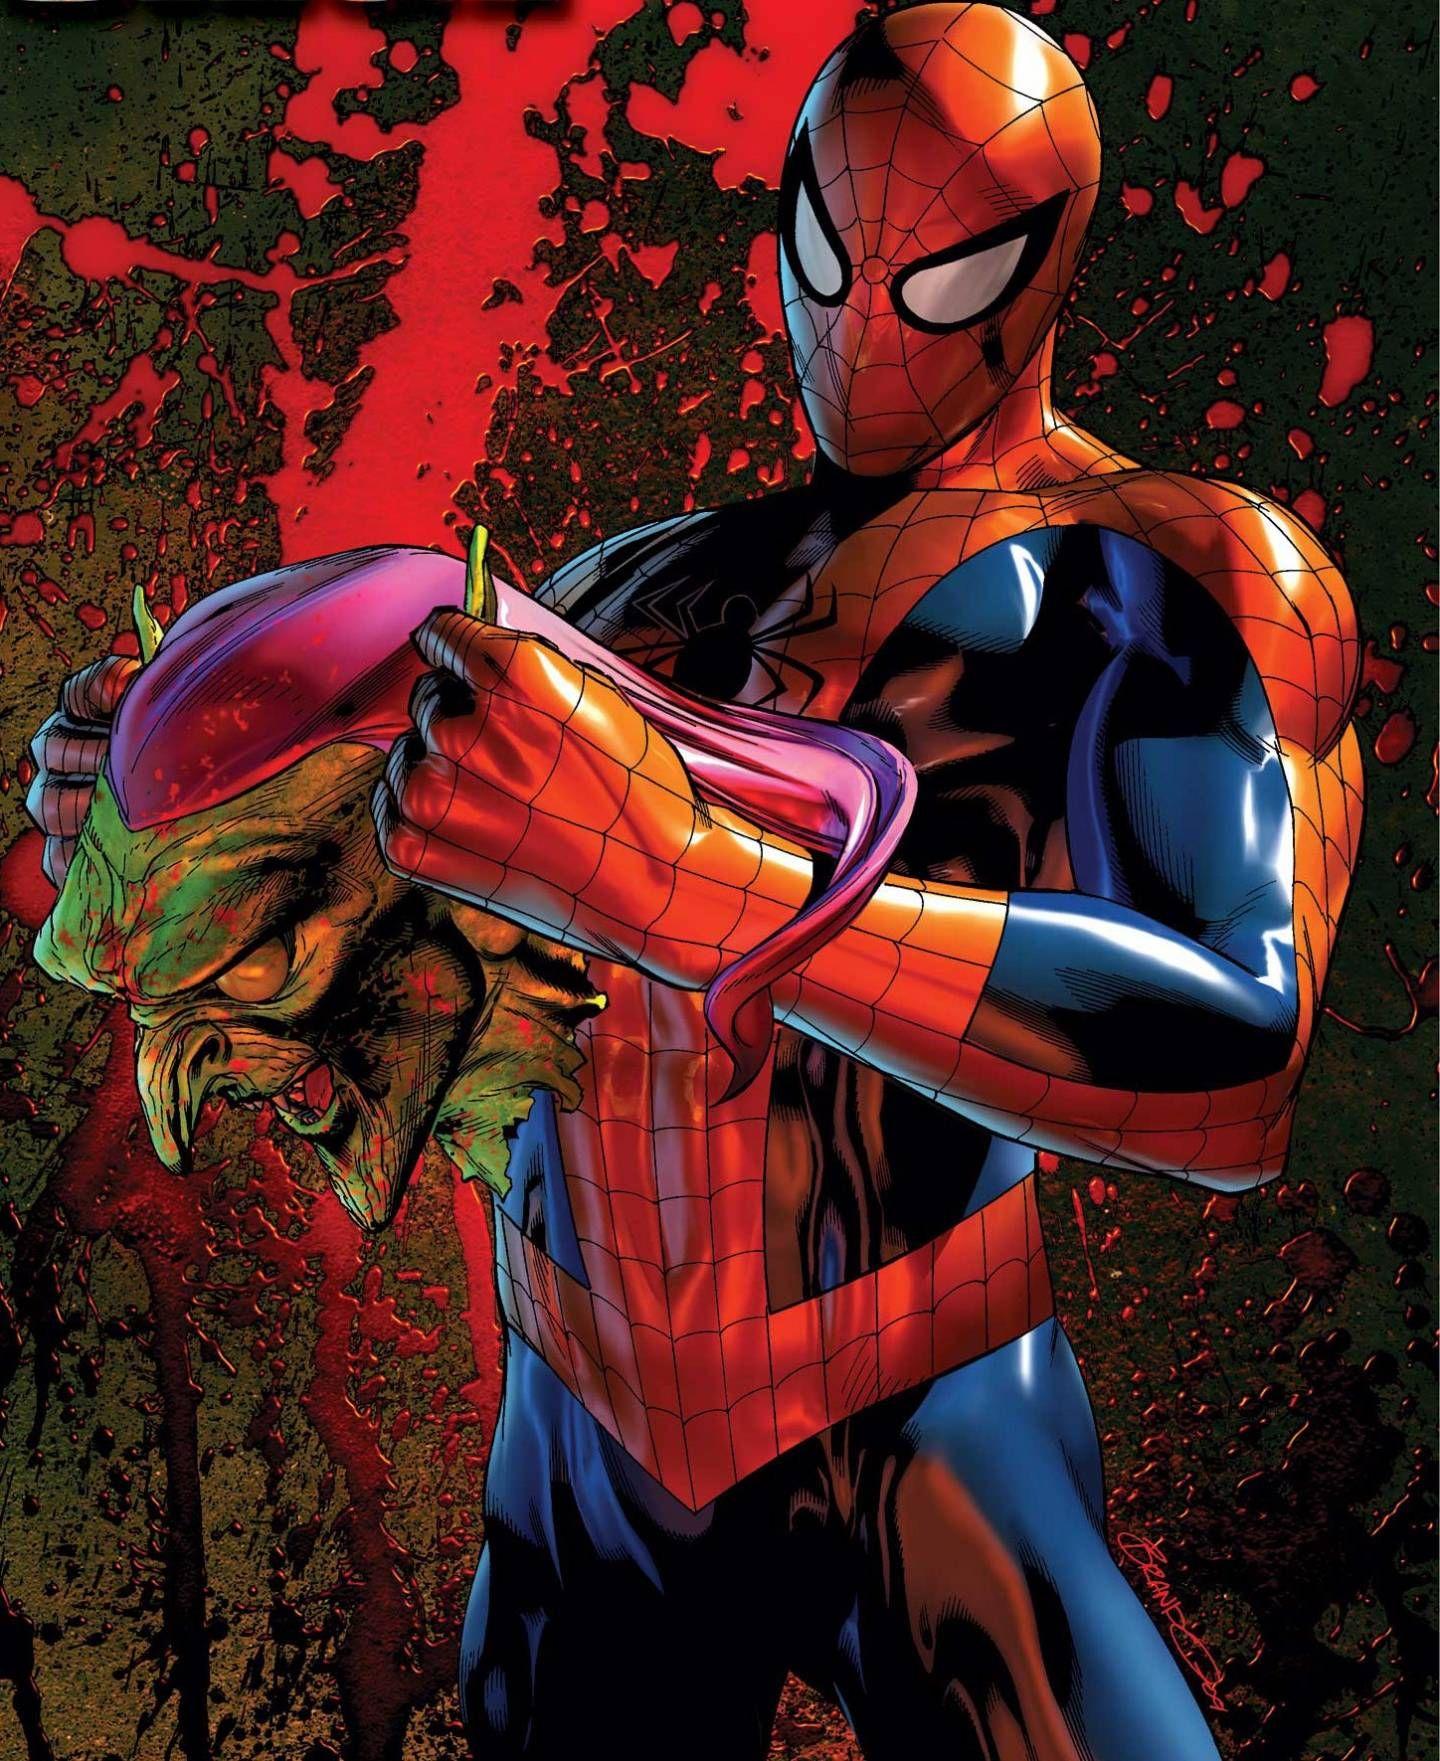 Spiderman Comic Wallpaper For iPhone As Wallpaper HD. Minions